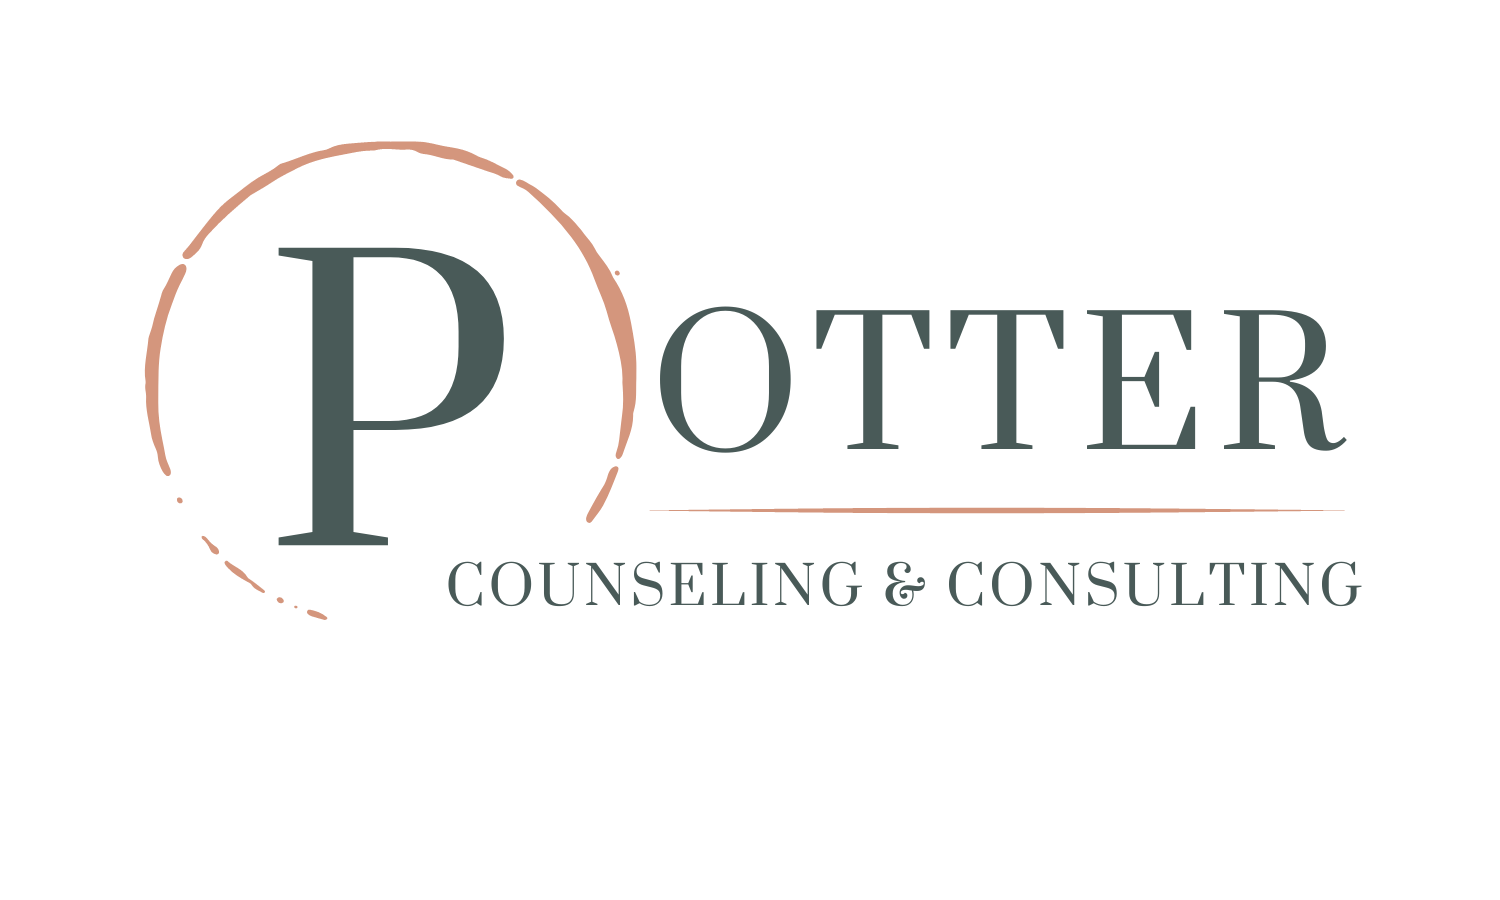 Potter Counseling and Consulting